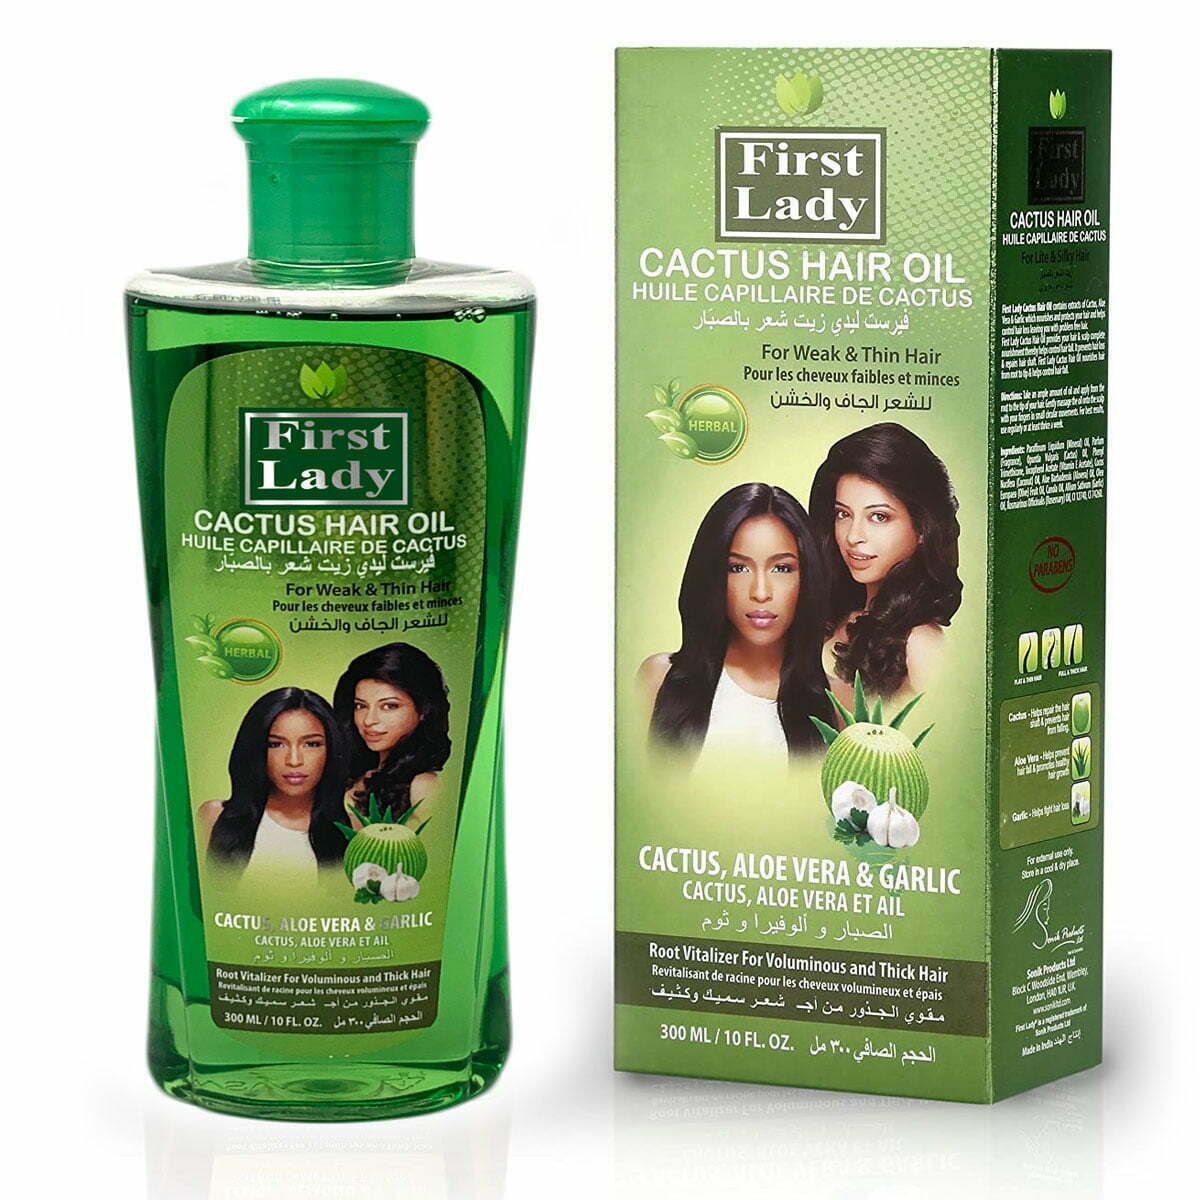 First Lady Cactus Hair Oil contains extracts of Cactus, Aloe Vera & Garlic which nourishes and protects hair and helps control hair loss.